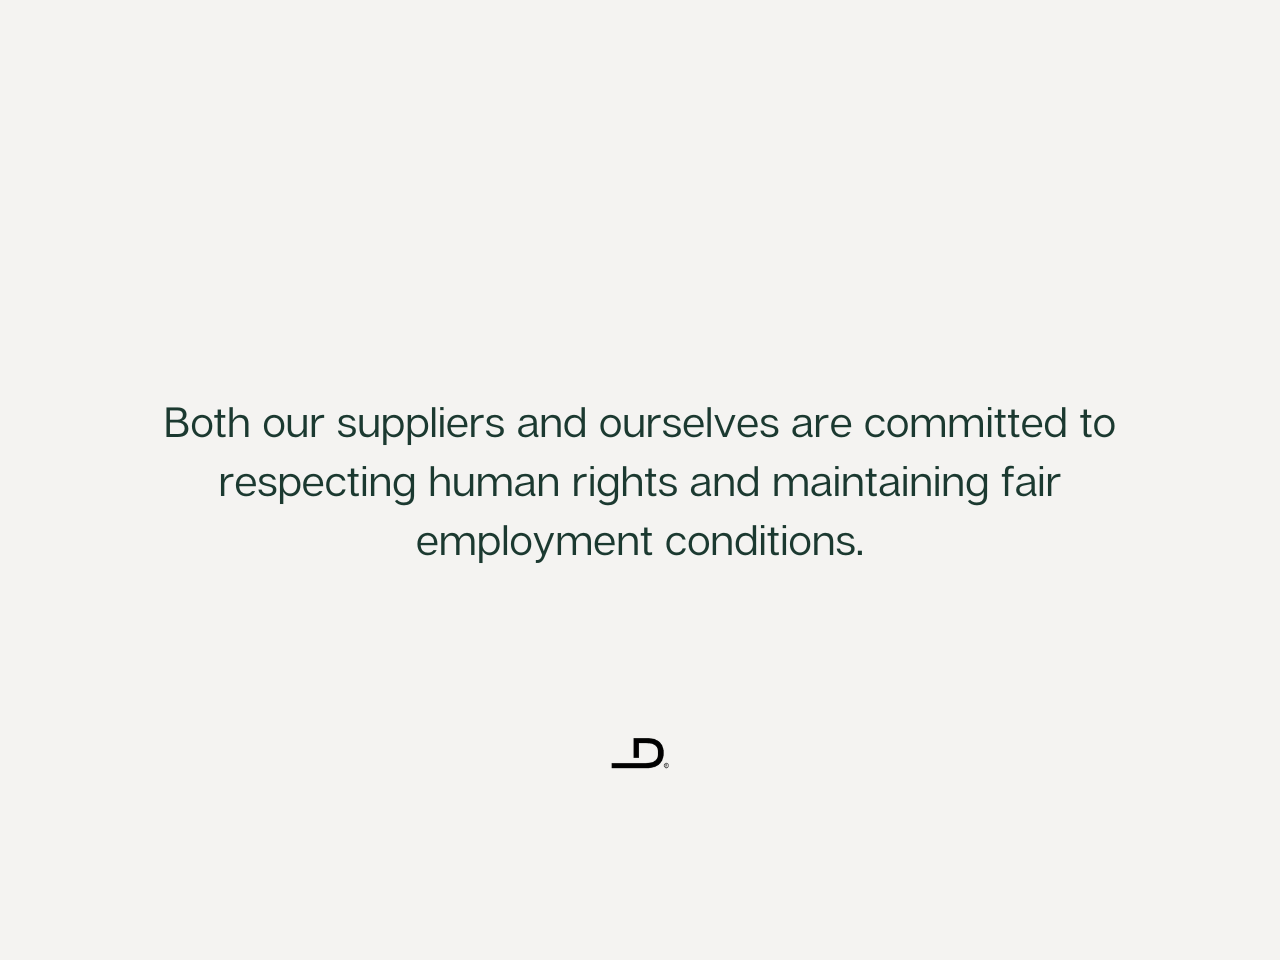 Decospan - Human rights and fair employment